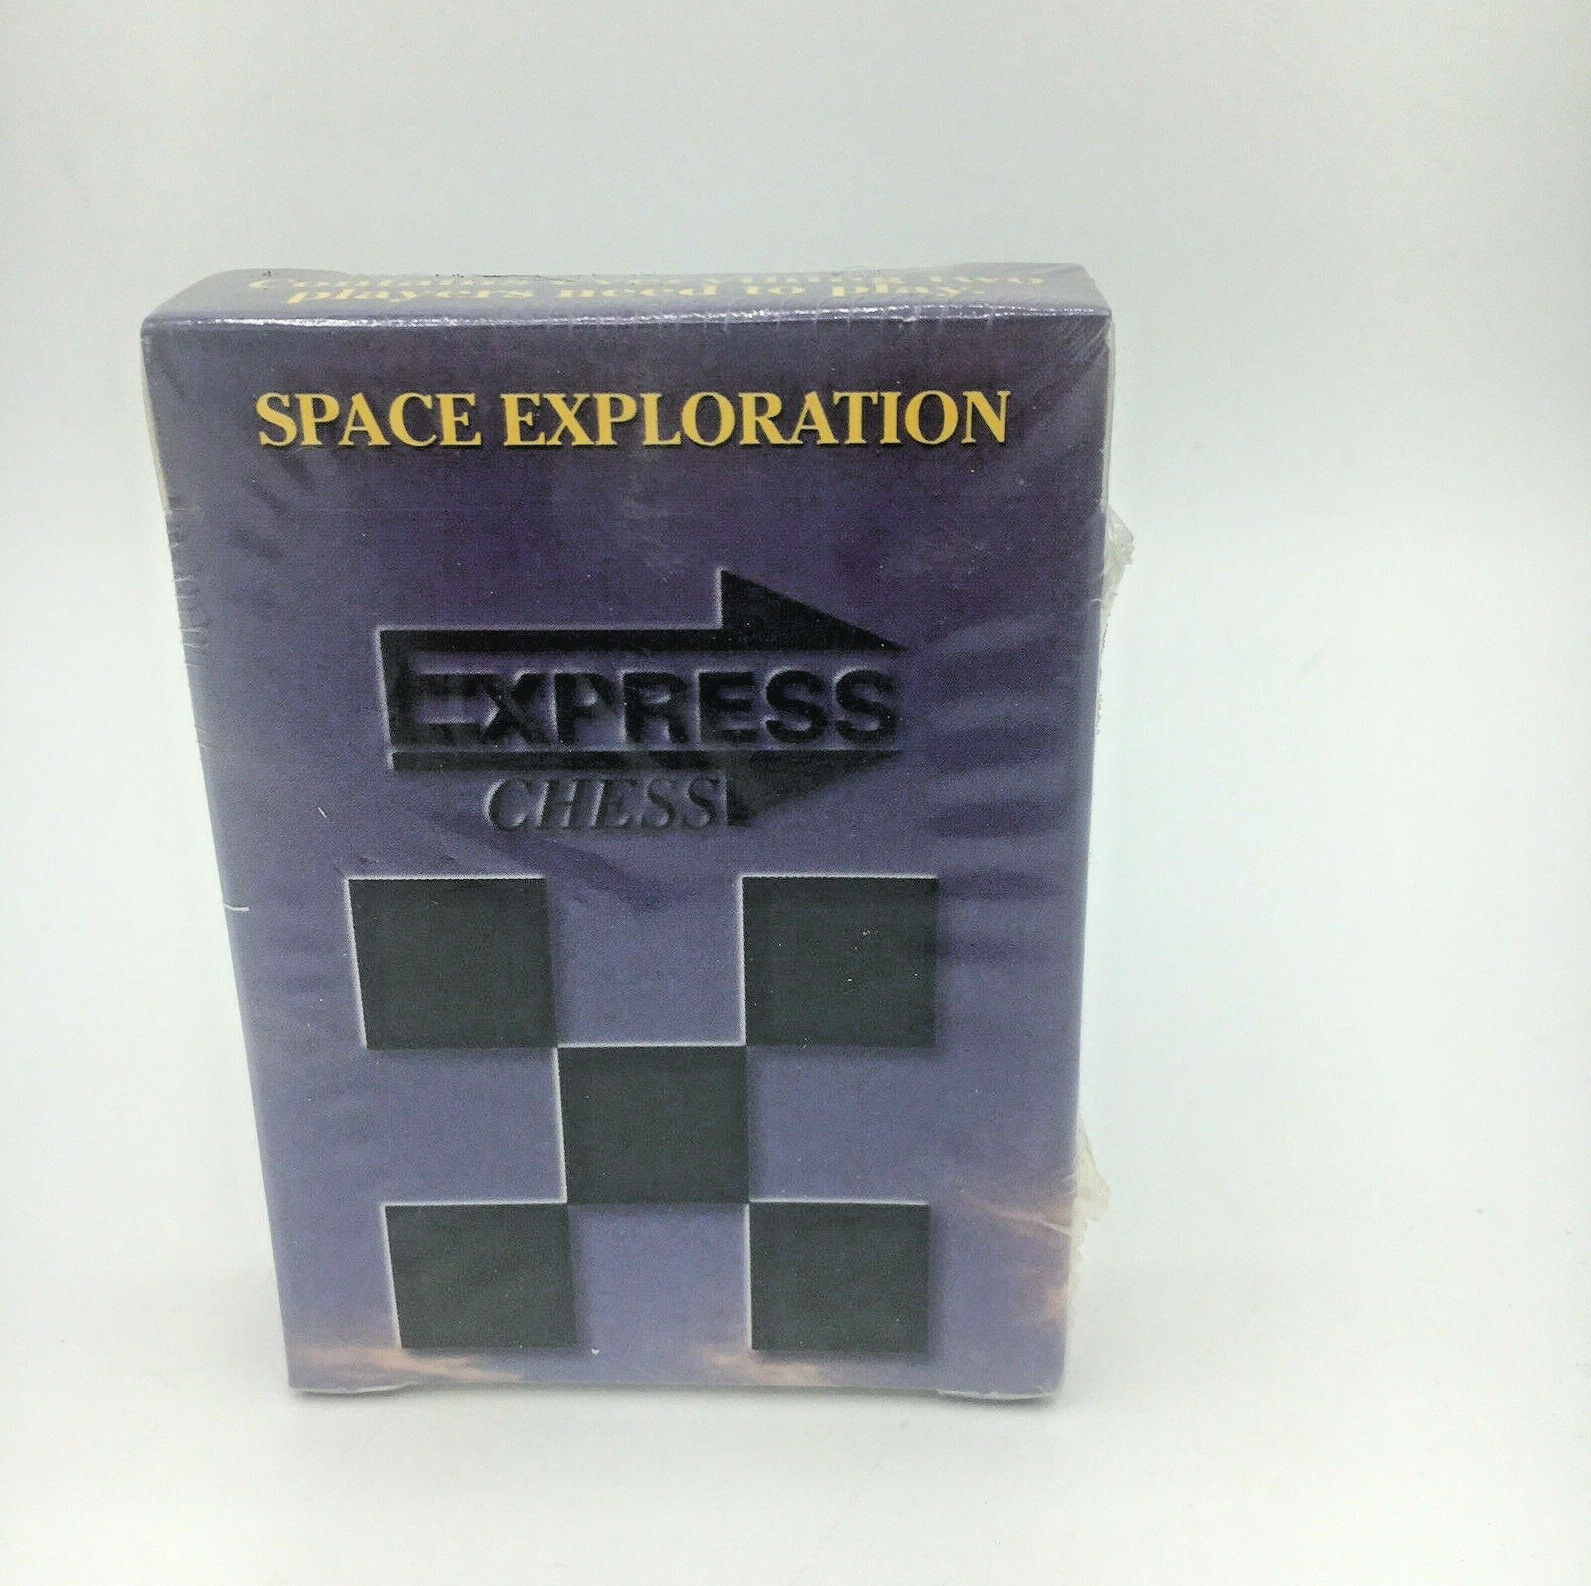 Express Chess New Card Game Space Exploration Strategy Sealed